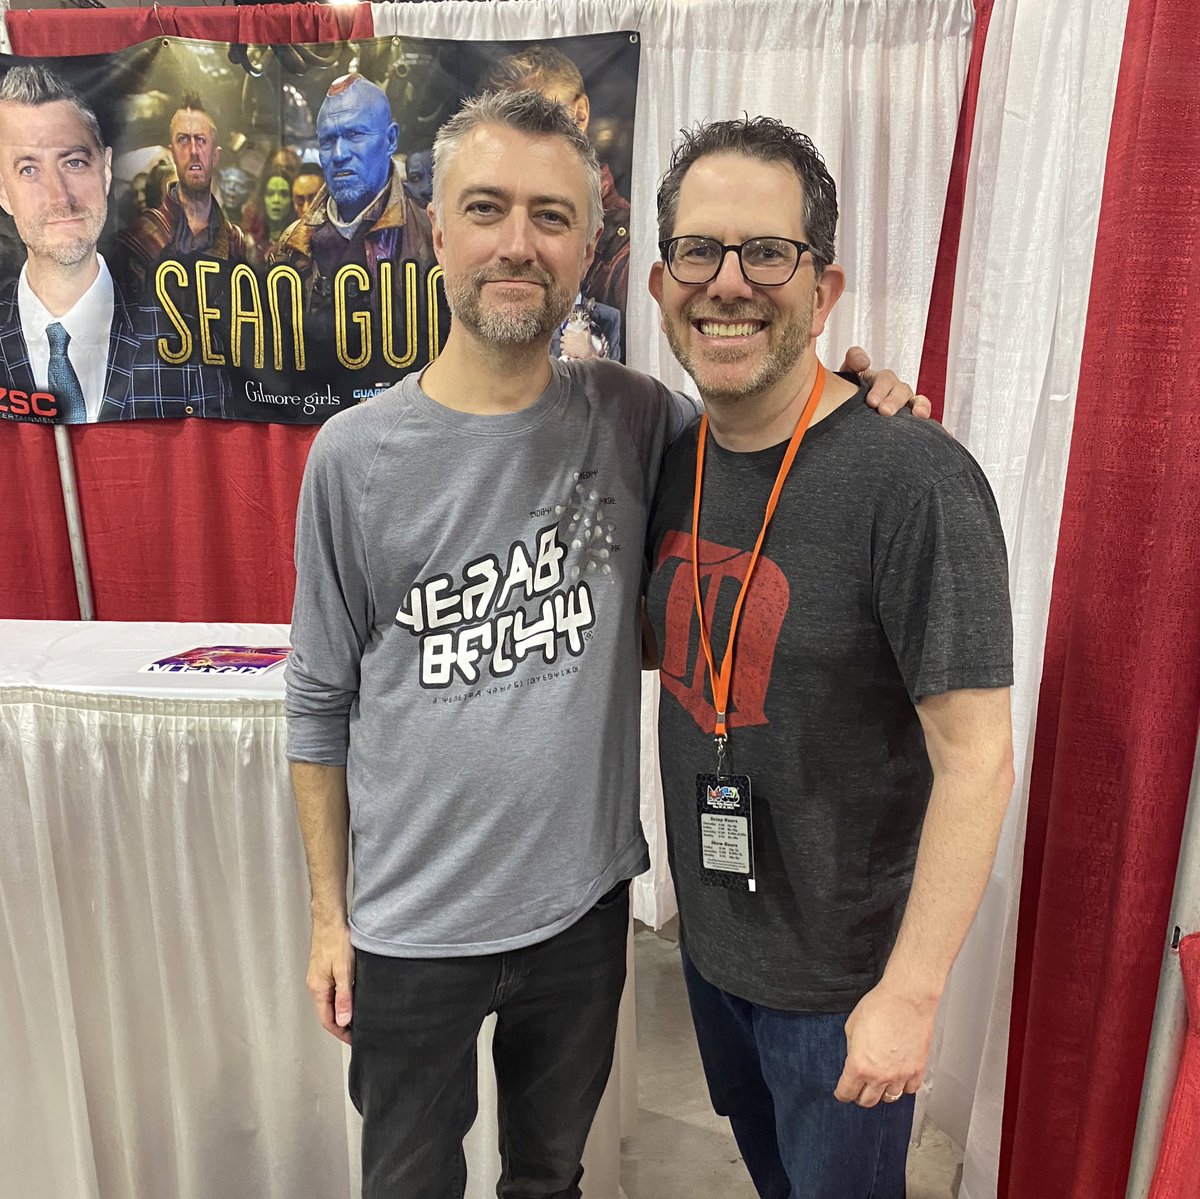 Hanging at the #MotorCityComicCon with Sean Gunn. 

Waiting for my Guardians application to be approved.